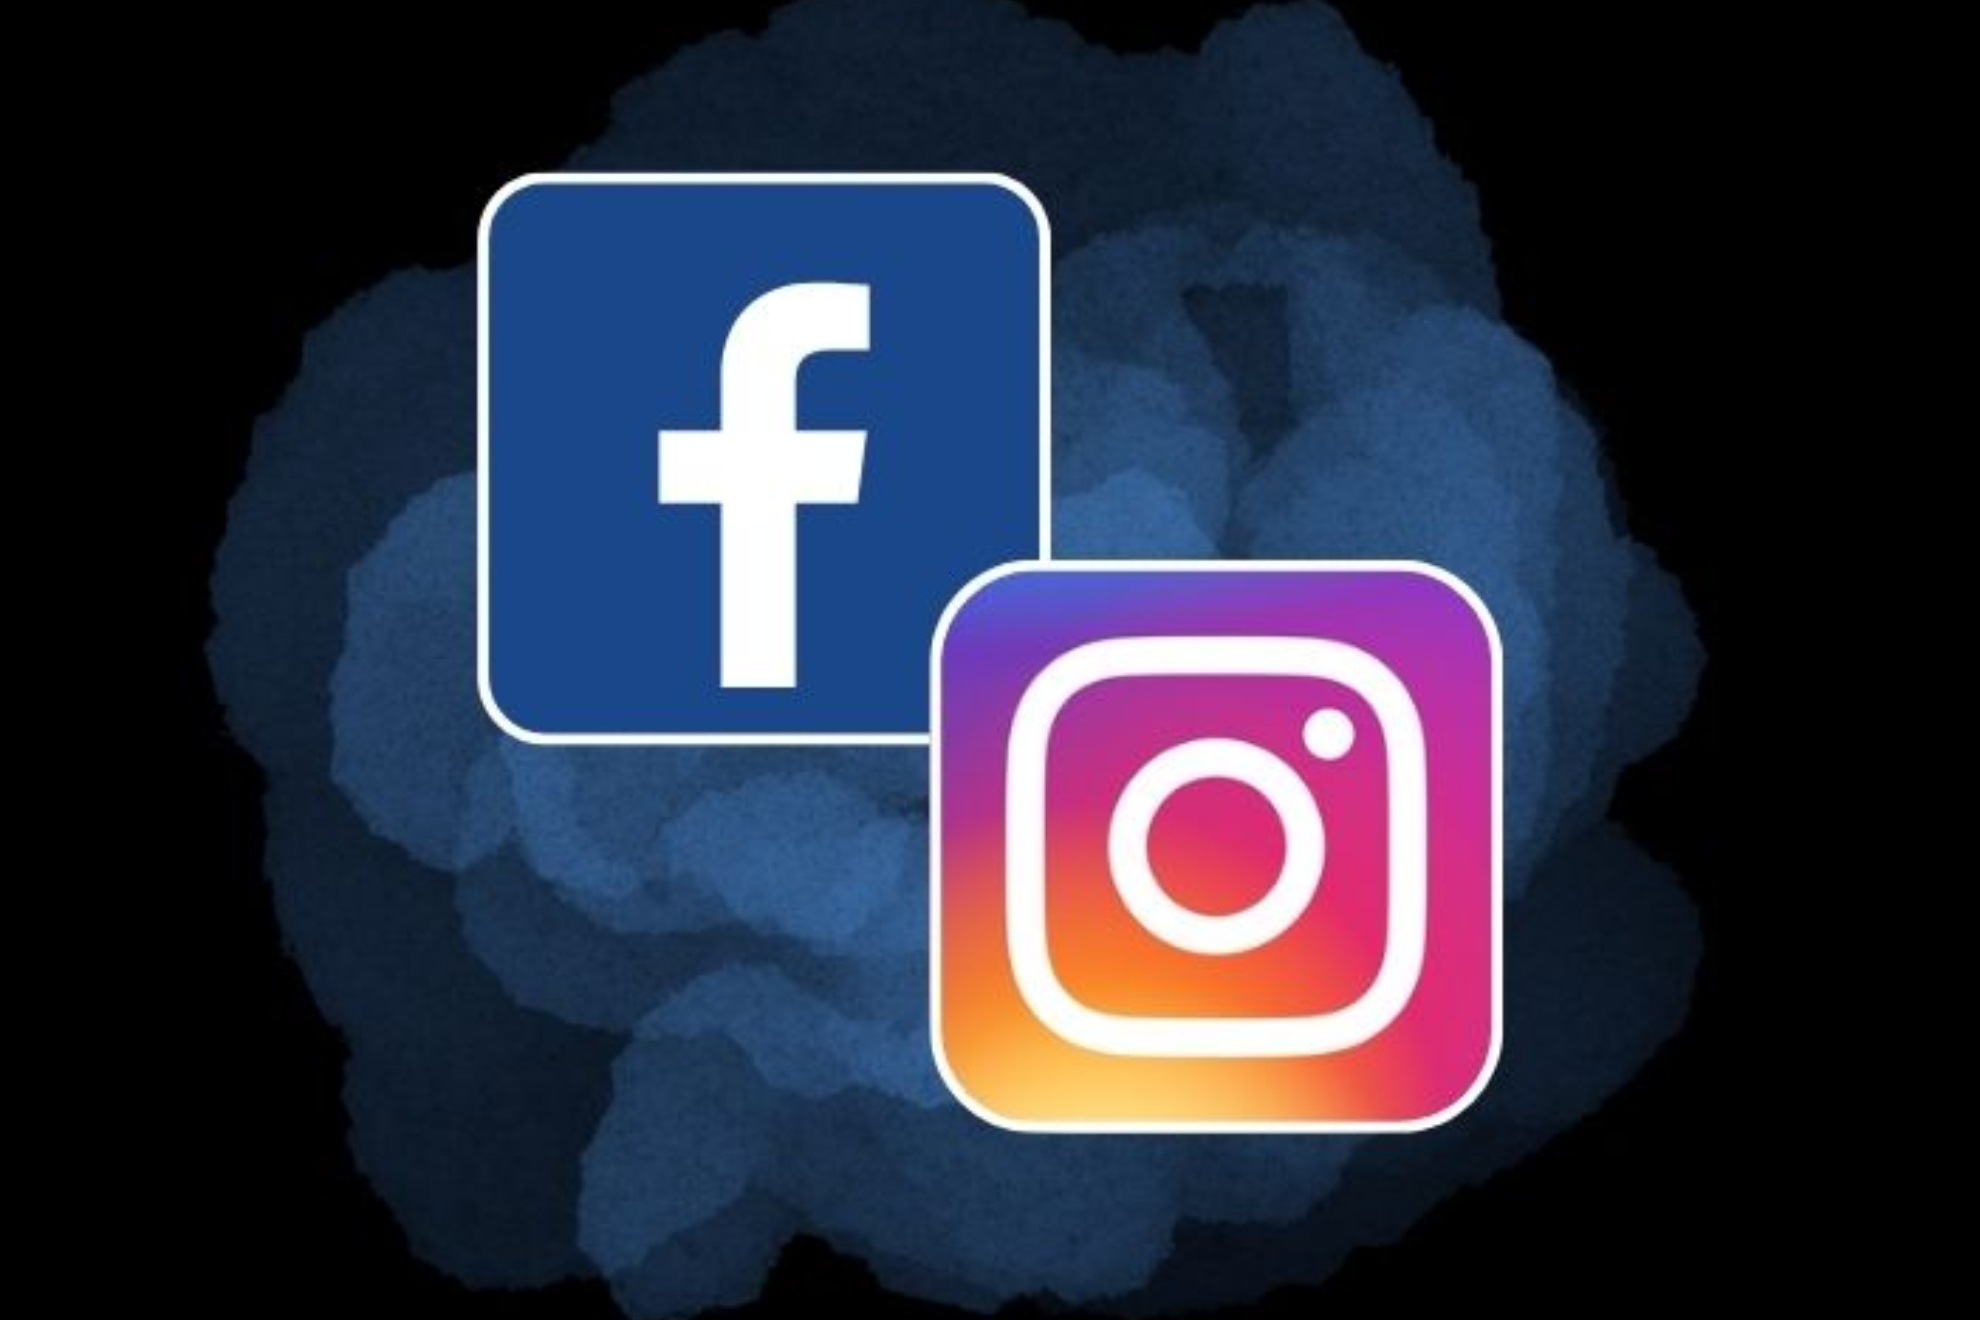 Image of the Facebook and Instagram logos